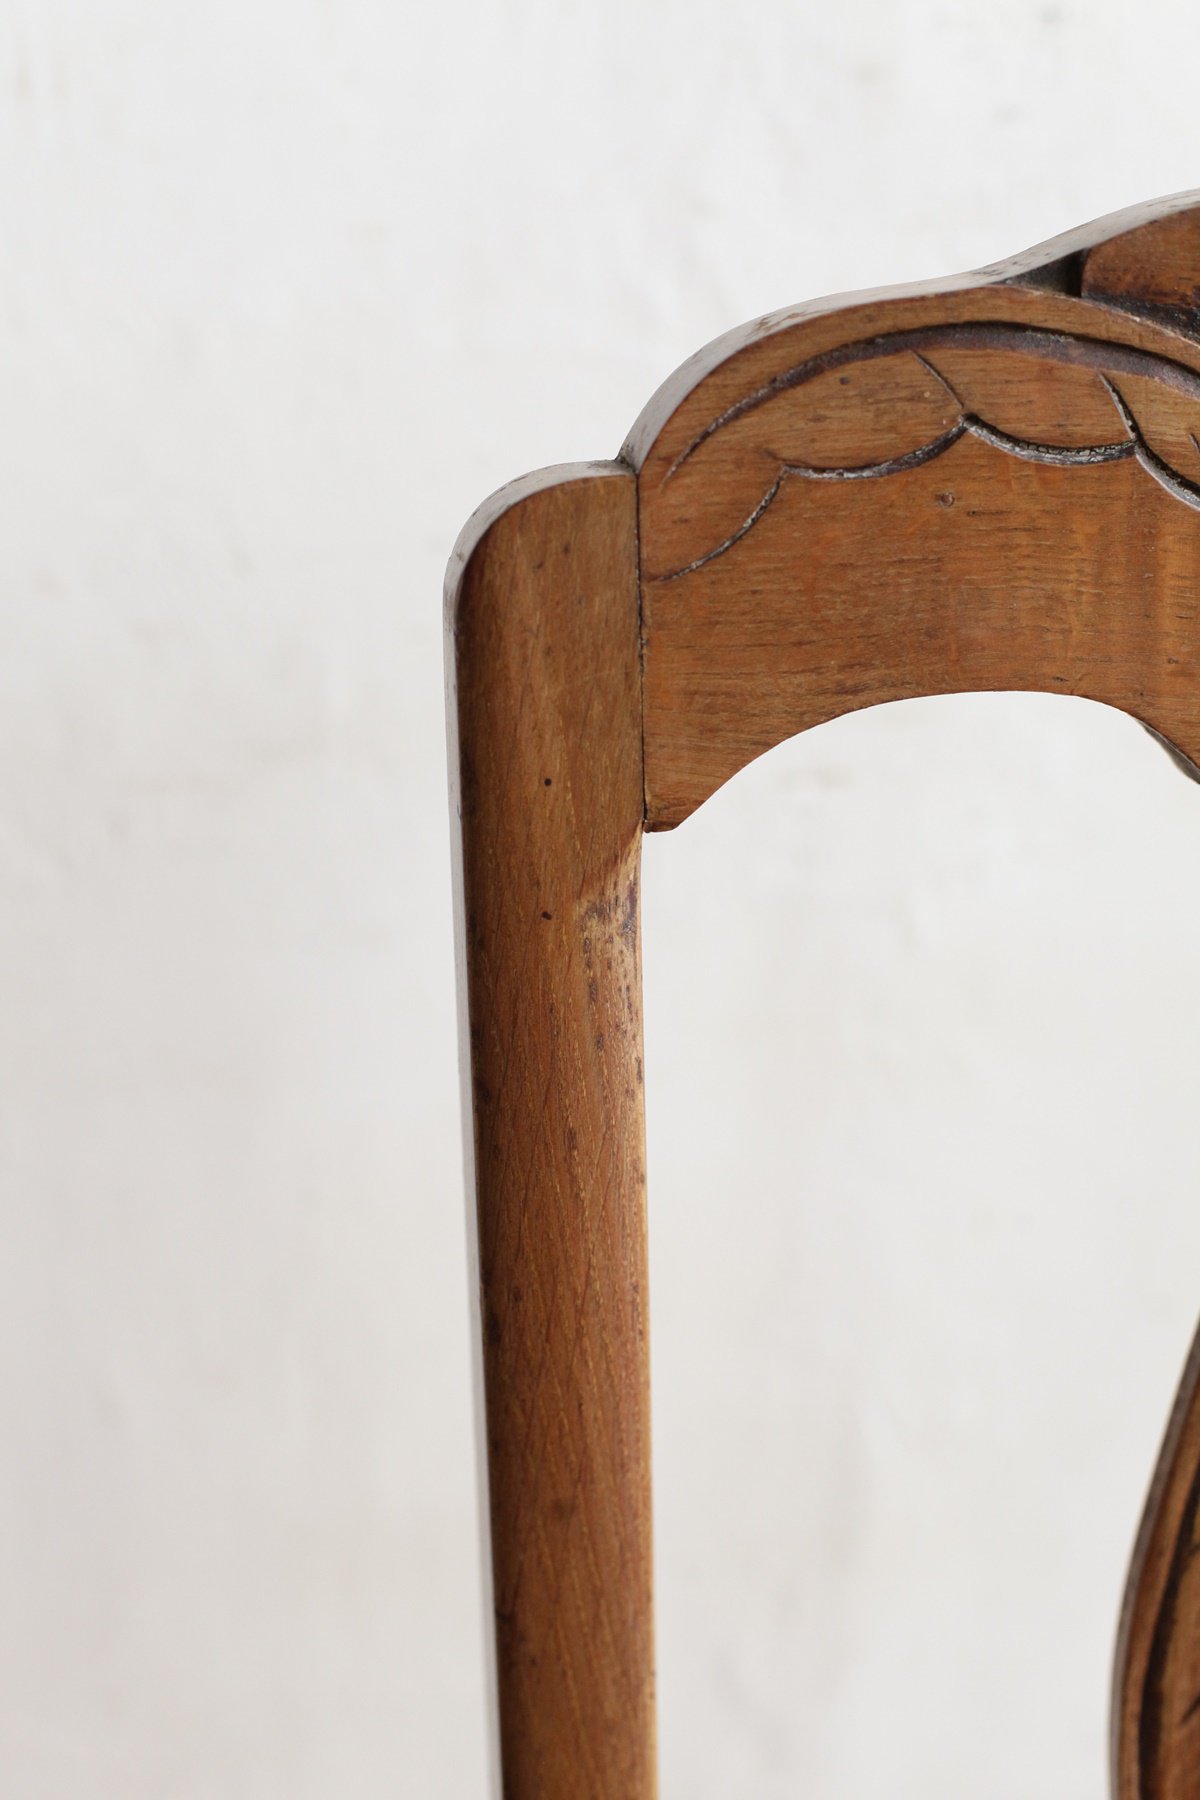 Wood chair[LY]